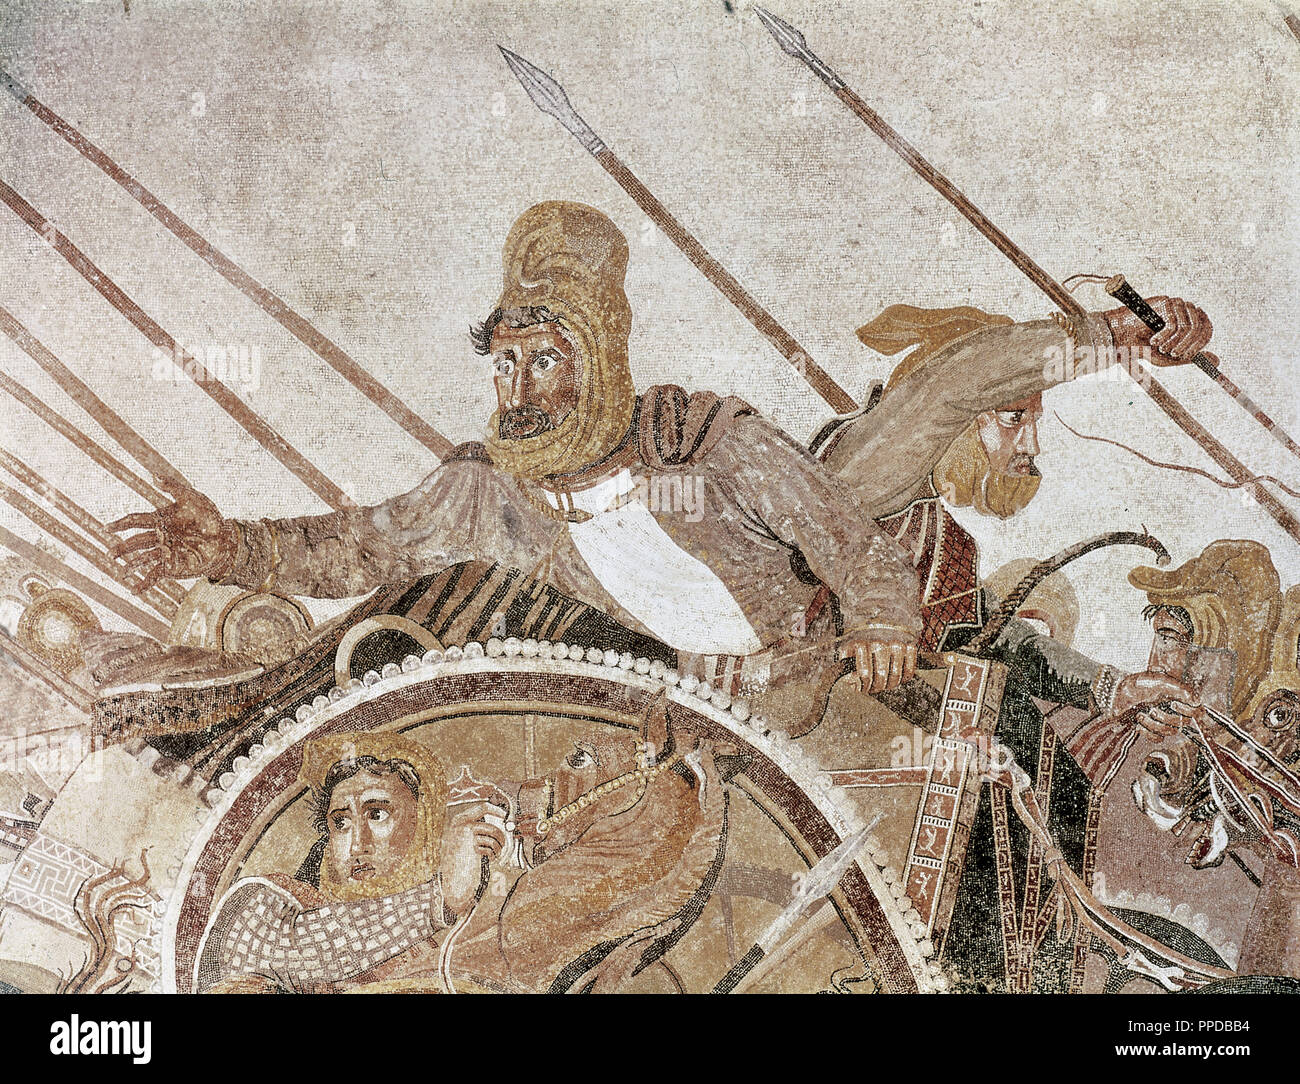 Darius III (ca. 380Ð330 BC), also known by his given name of Codomannus. Last king of the Achaemenid Empire of Persia from 336 BC to 330 BC. Detail of the king in The Alexander Mosaic (ca.100 B.C.) depicting the Batlle of Issus betwen Alexander the Great and Darius III of Persia. Naples National Archaeological Museum. Italy. Stock Photo